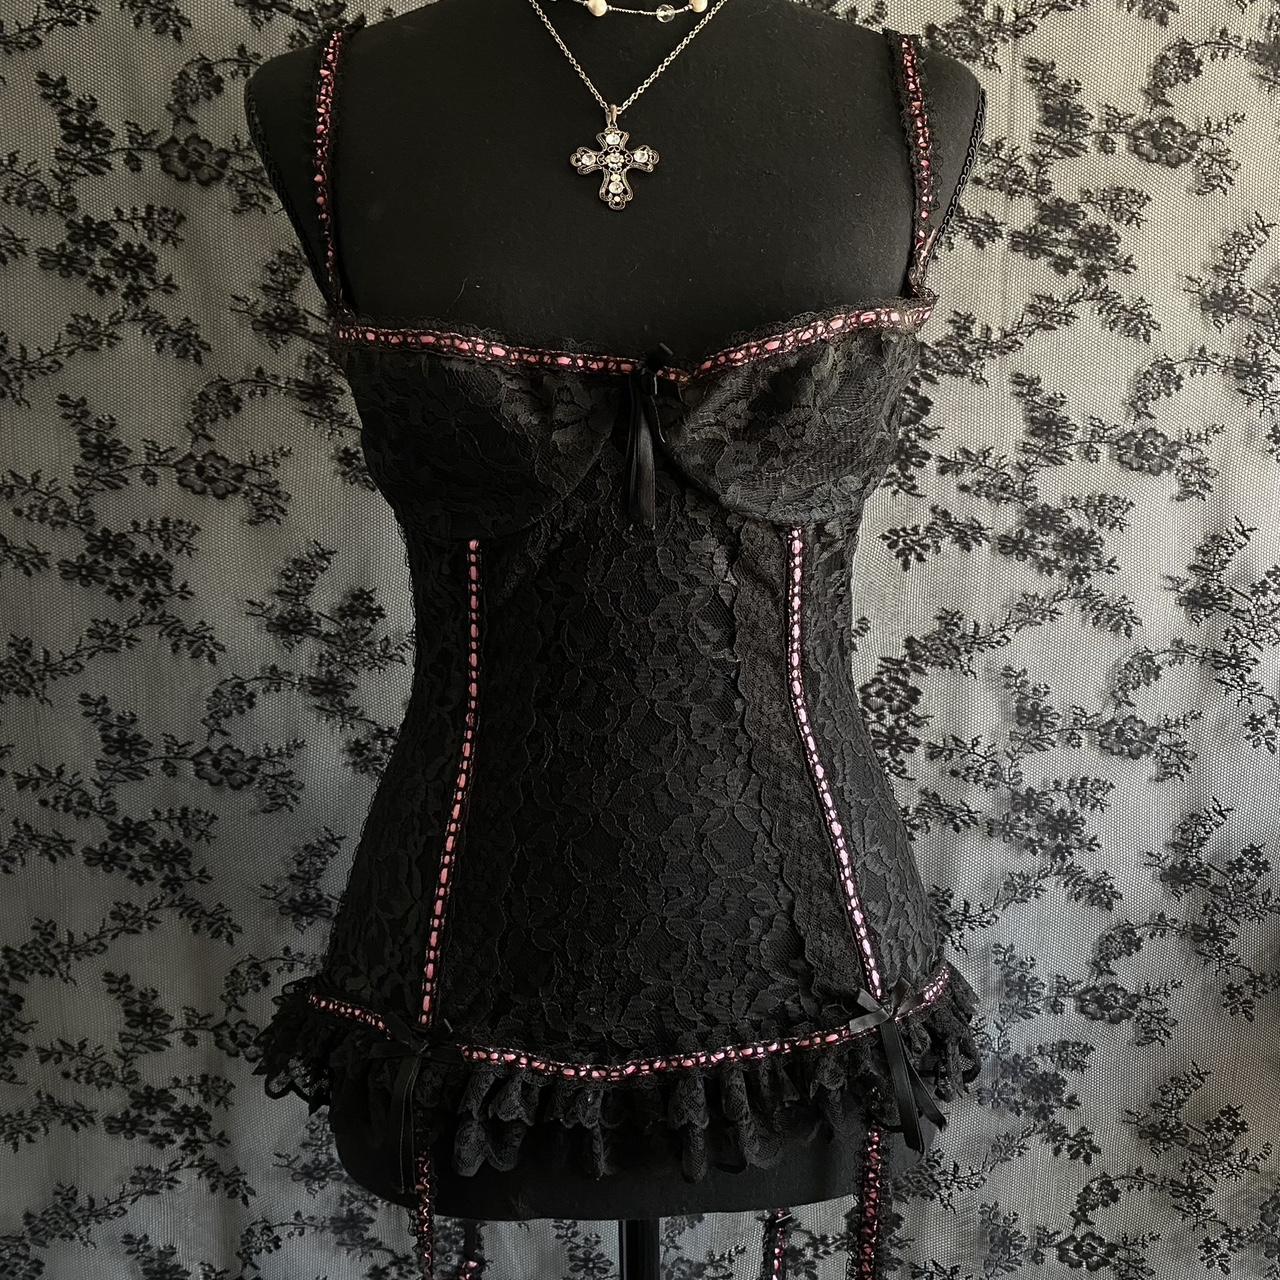 American Vintage Women's Black and Pink Corset (2)